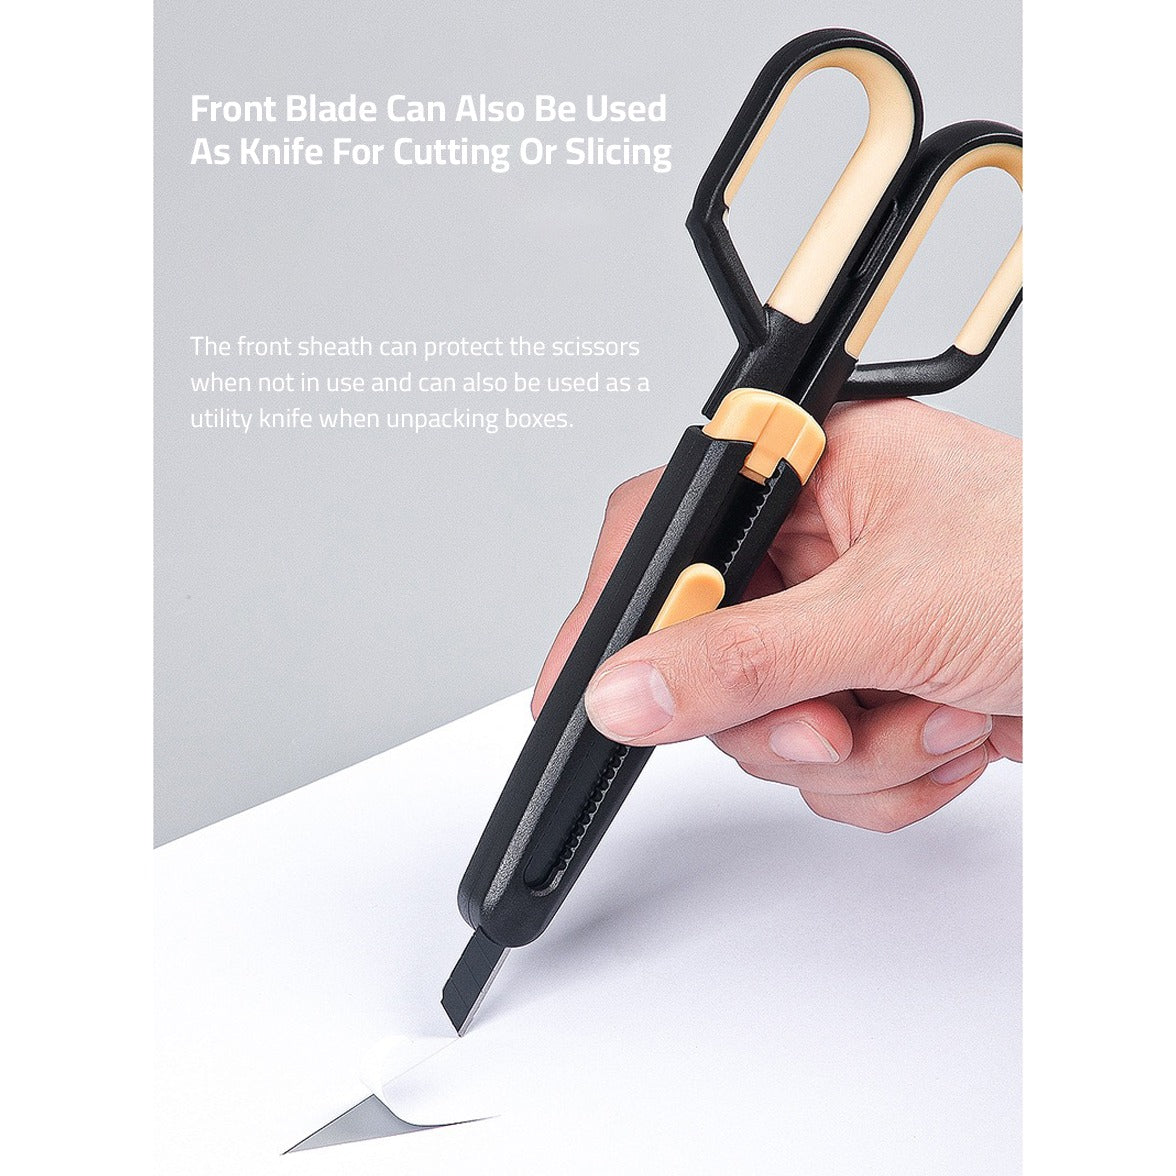 A paper being teared by a person with Scissors using it's Paper Cutting Blade